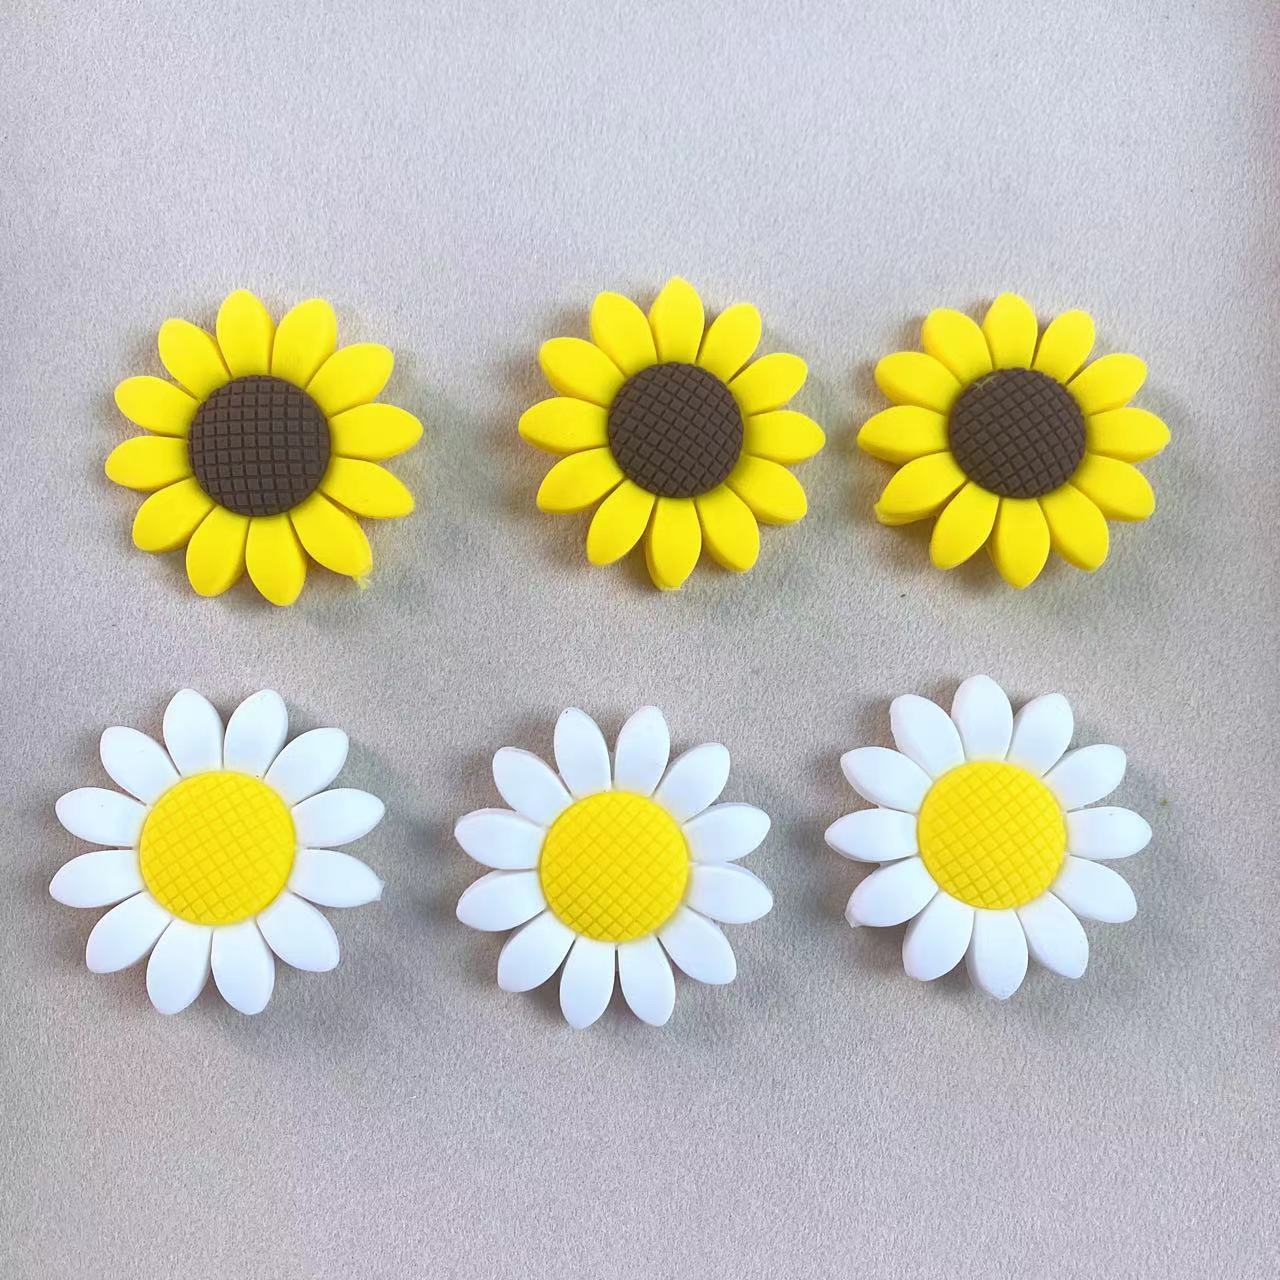 10 Pieces 40MM Random Mixed Sunflower Silicone Focal Beads Mixed Color